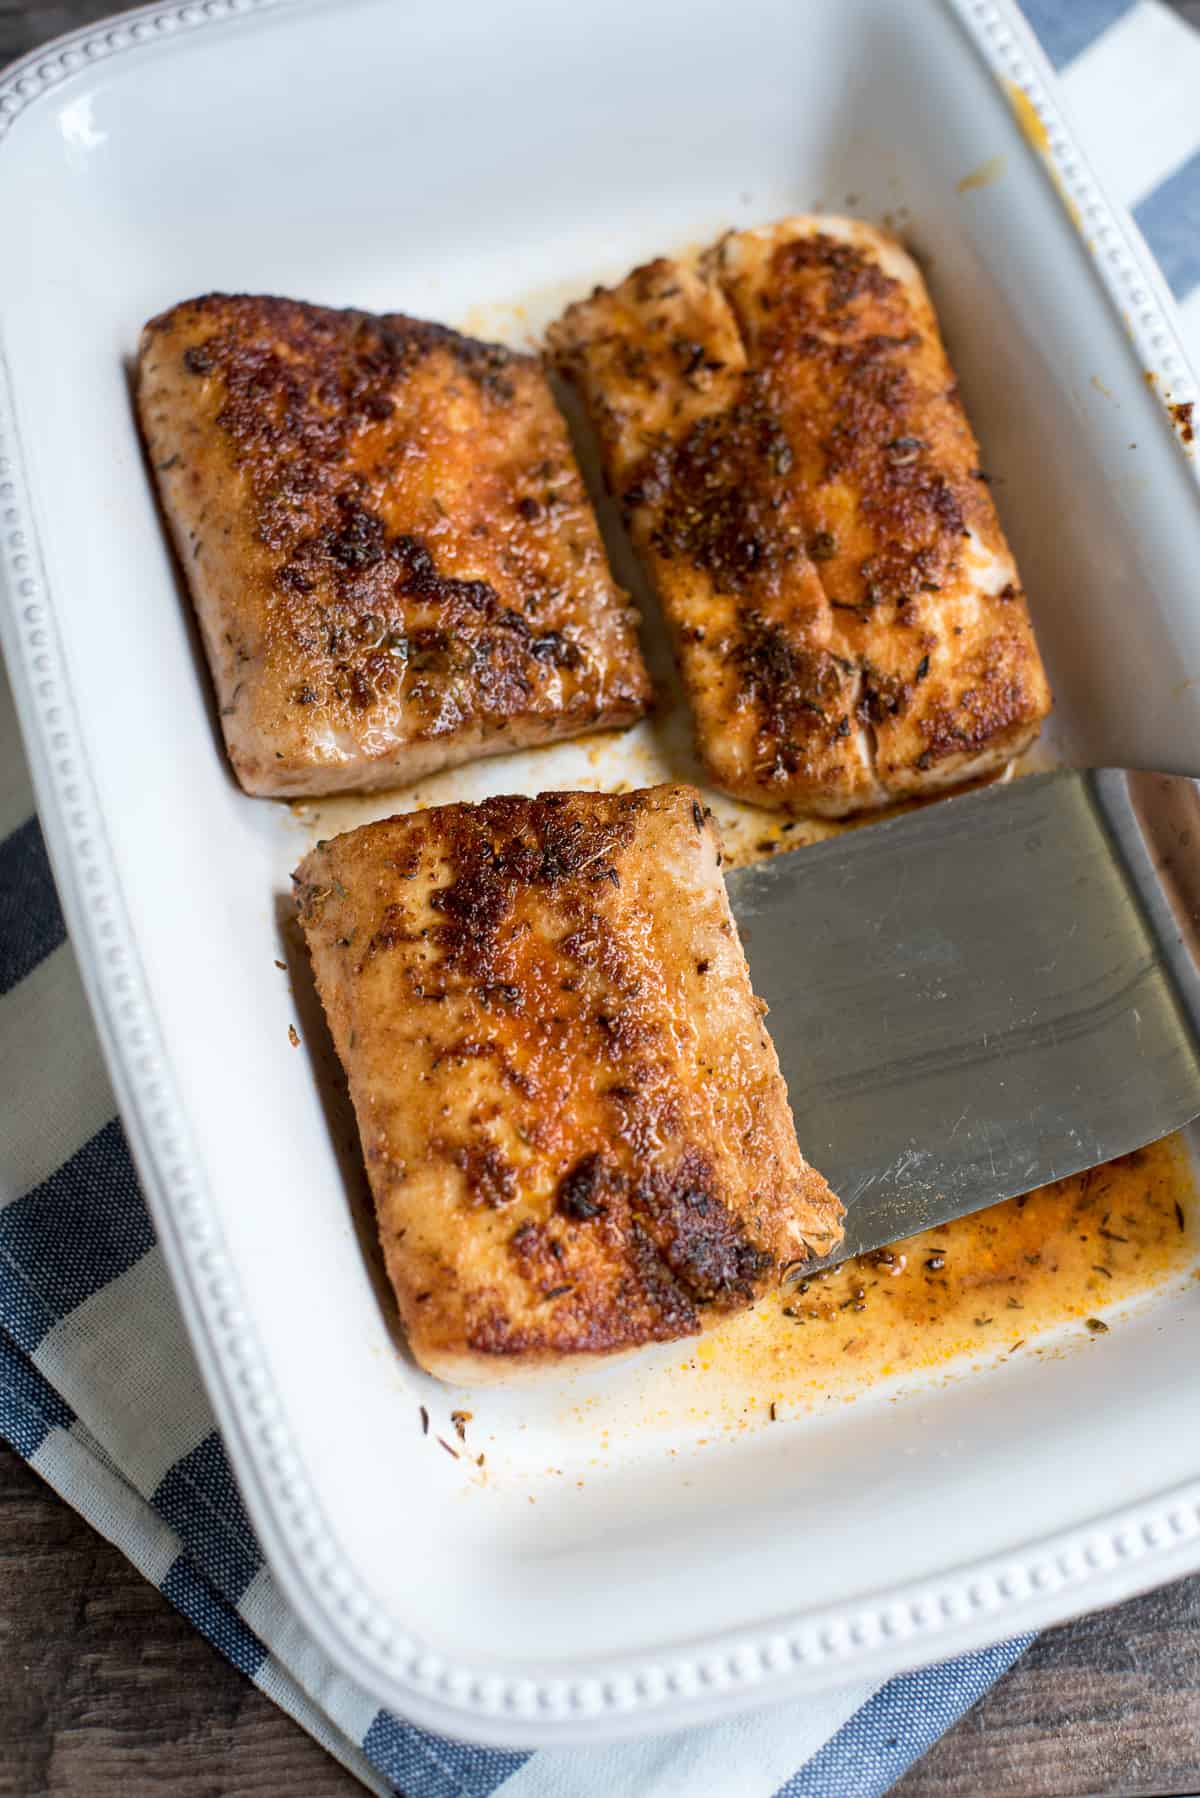 A spatula under a piece of cooked mahi mahi in a serving dish.